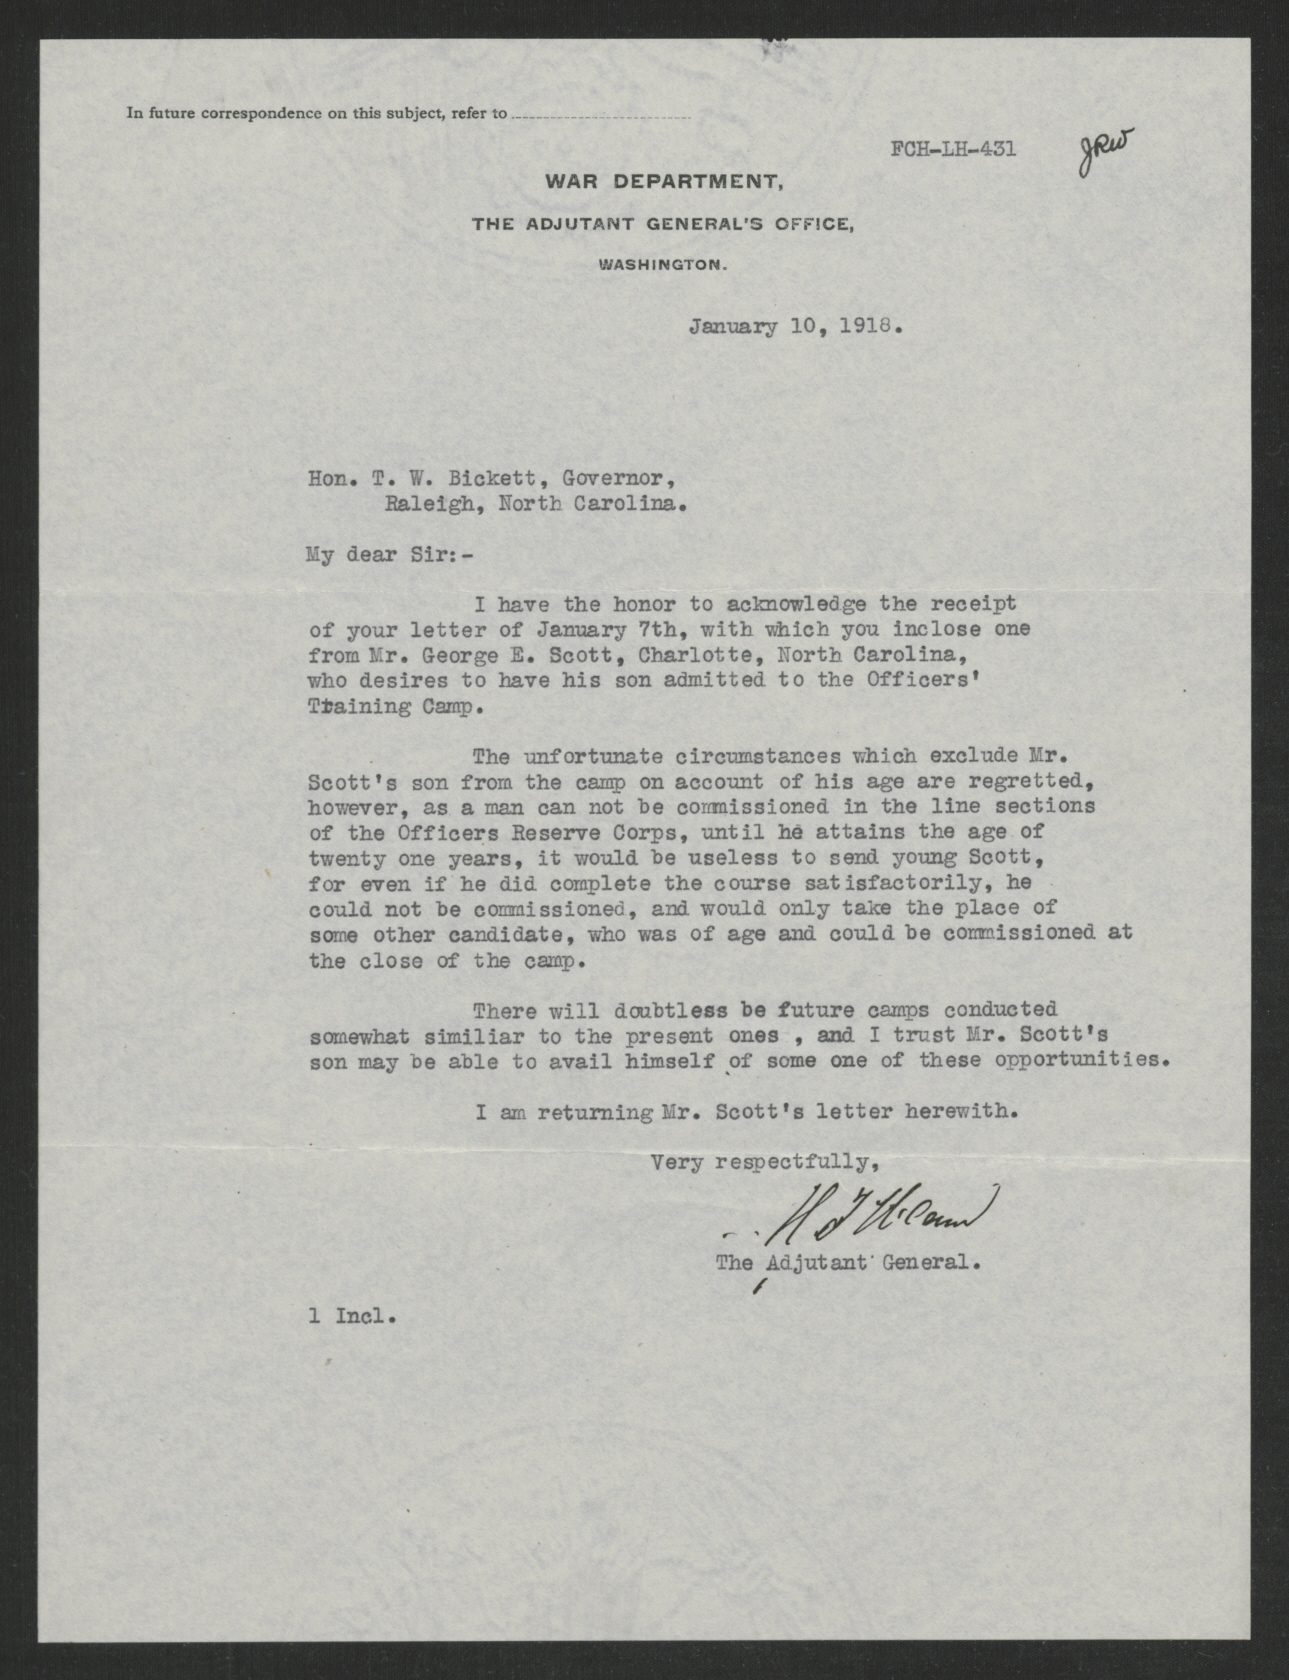 Letter from Henry P. McCain to Thomas W. Bickett, January 10, 1918